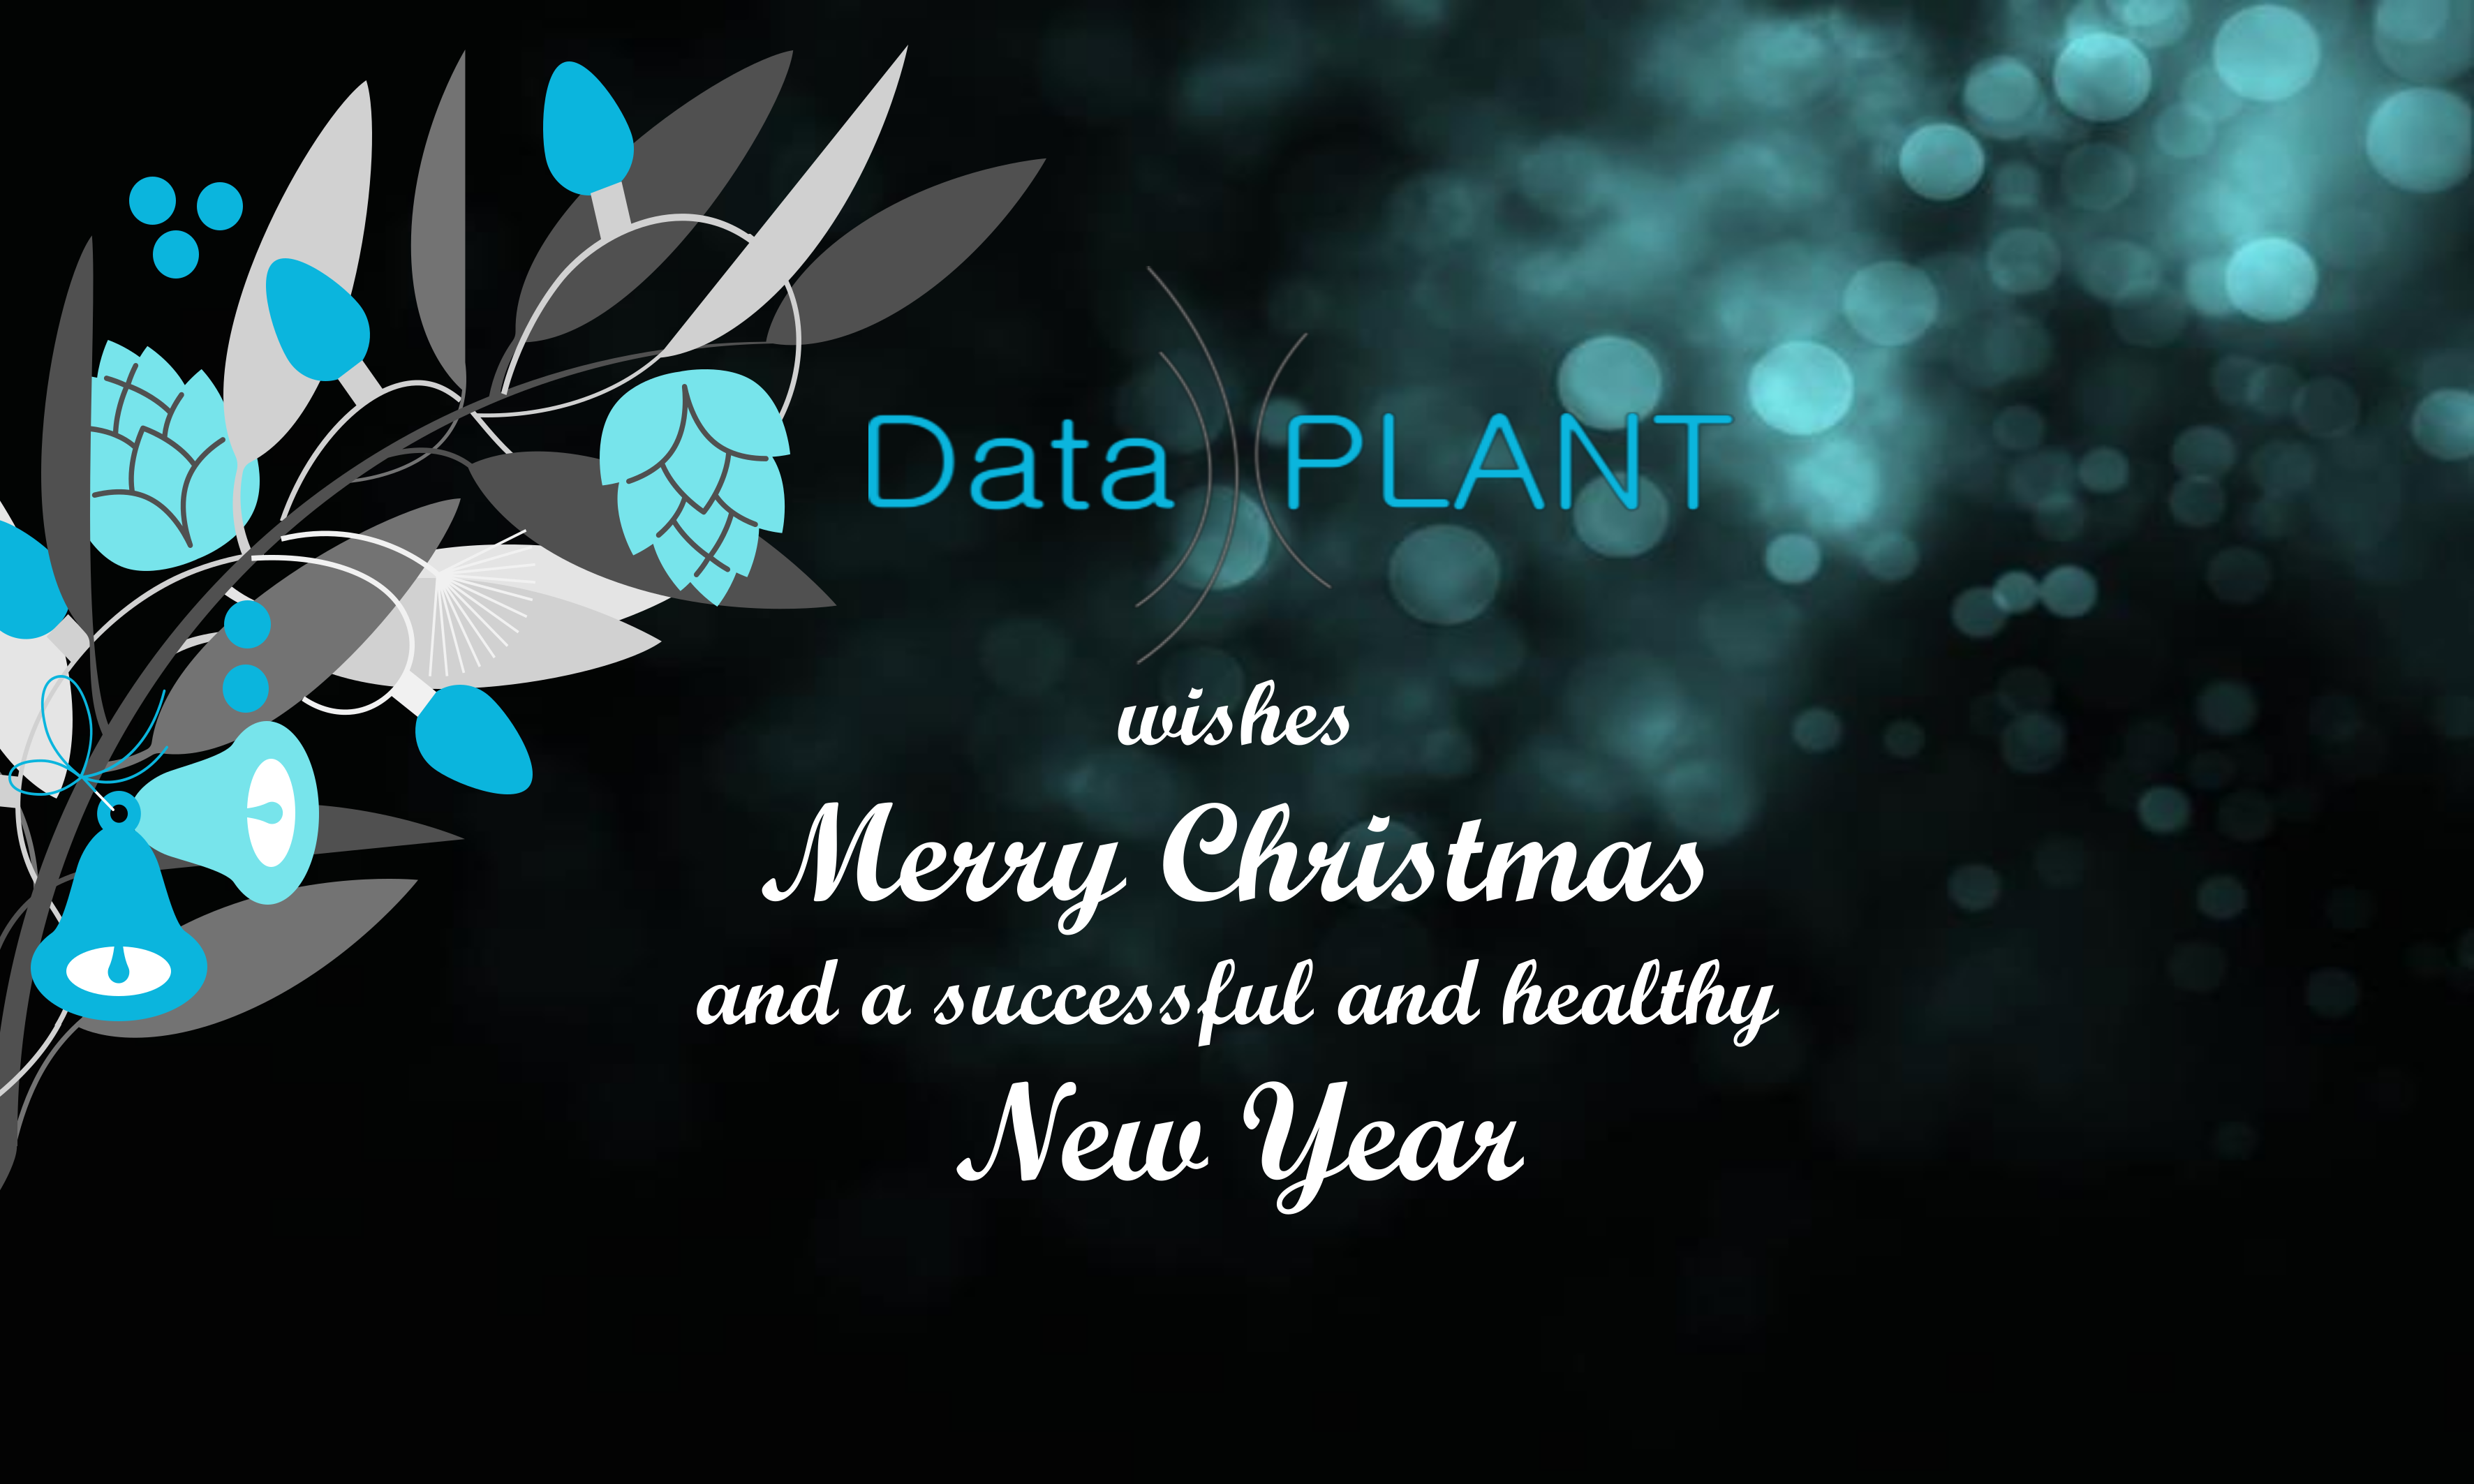 DataPLANT wishes a Merry Christmas